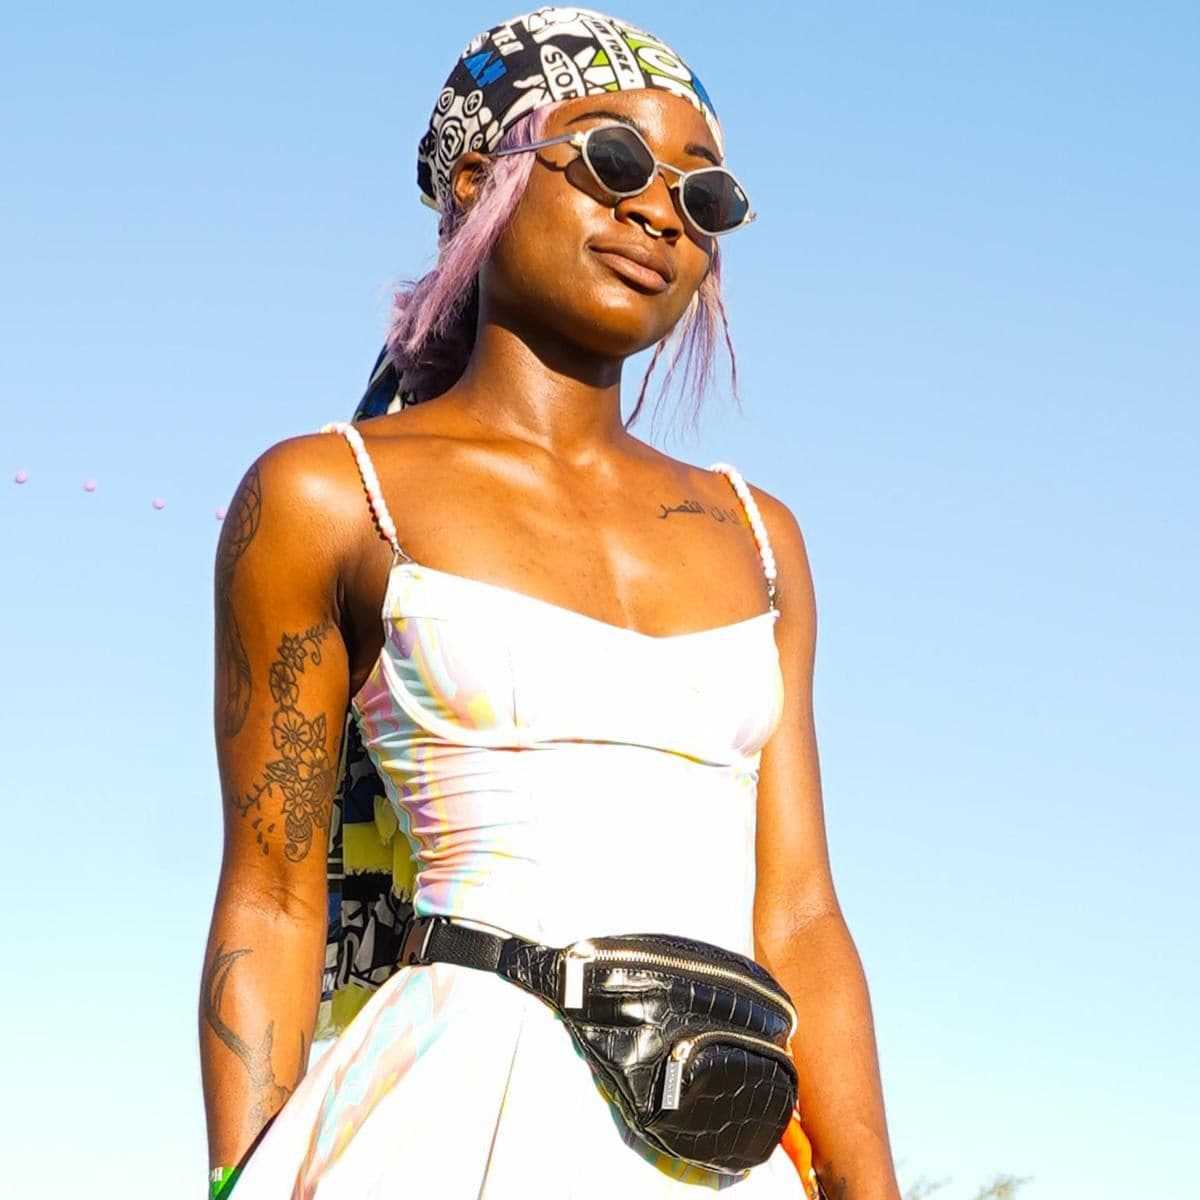 Street Style At The 2019 Coachella Valley Music And Arts Festival - Weekend 2